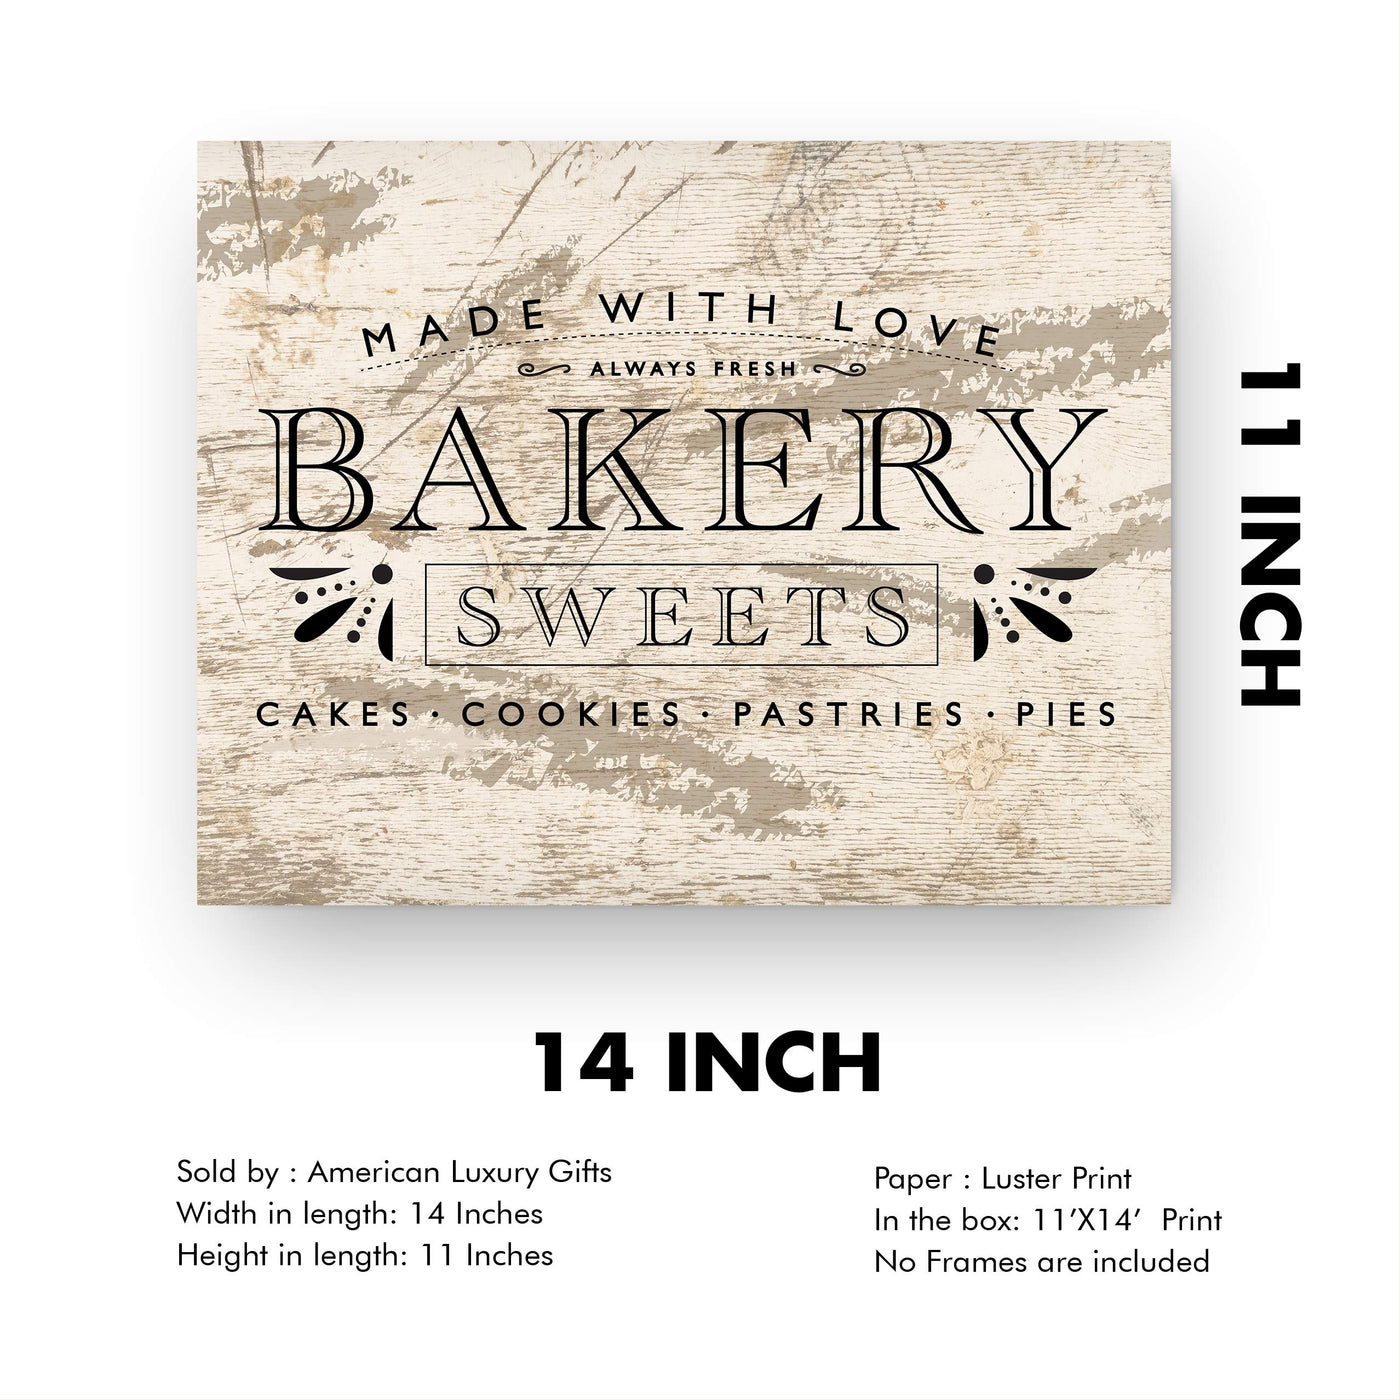 Bakery-Made With Love-Always Fresh -Vintage Wall Art Sign -14 x 11" Replica Distressed Wood Poster Print-Ready to Frame. Country Rustic Home-Kitchen-Pantry-Farmhouse Decor. Printed on Paper.